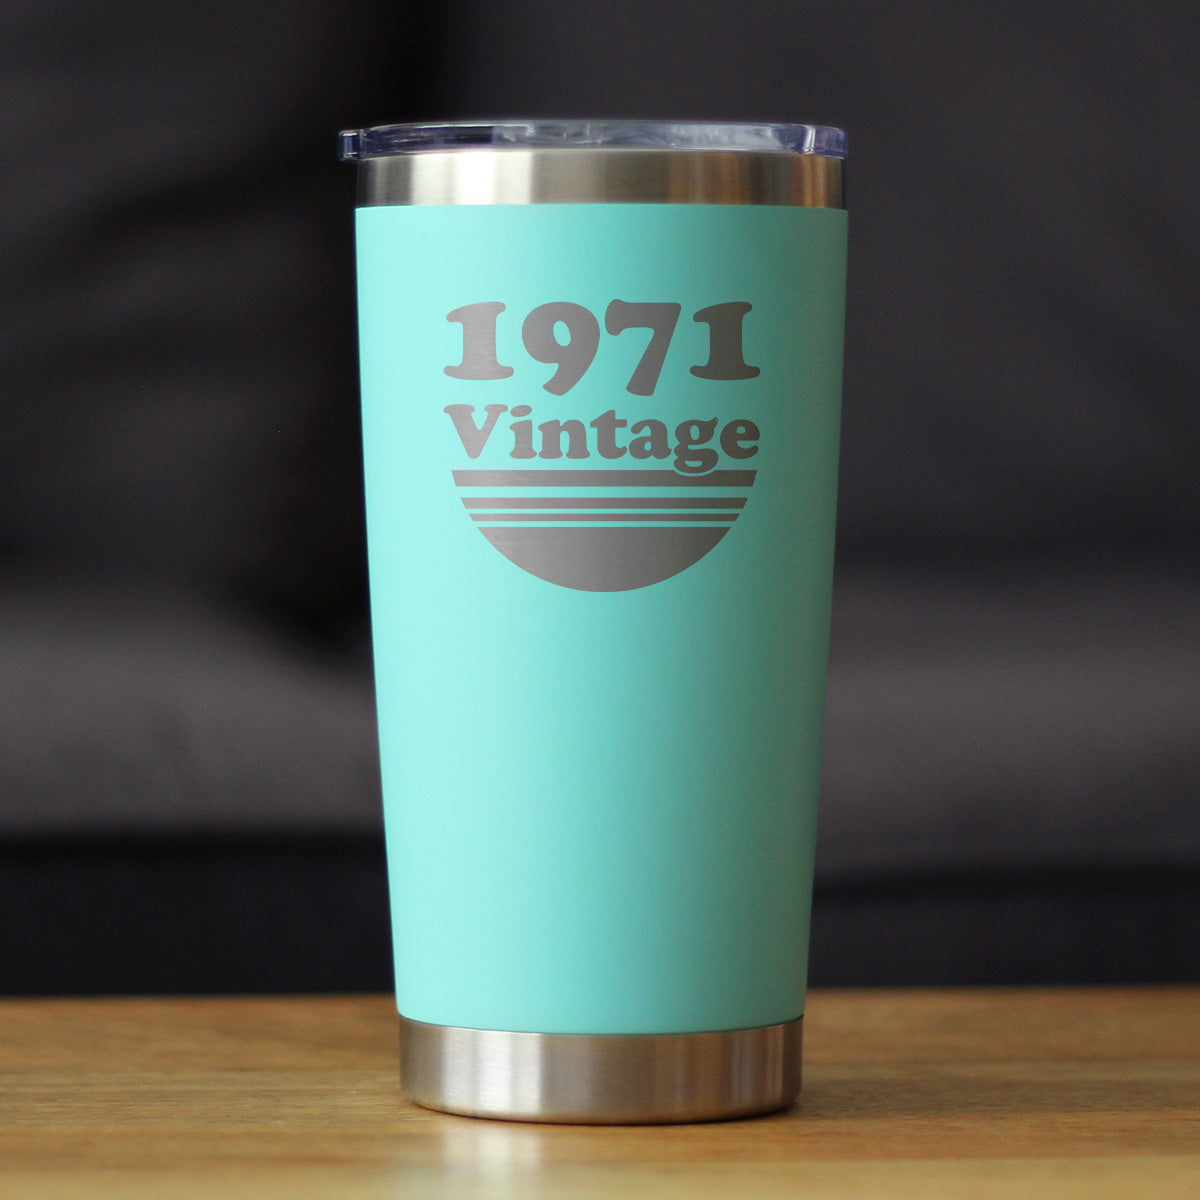 Vintage 1971 - Insulated Coffee Tumbler Cup with Sliding Lid - 20 oz - Funny 53rd Birthday Gift for Women or Men Turning 53